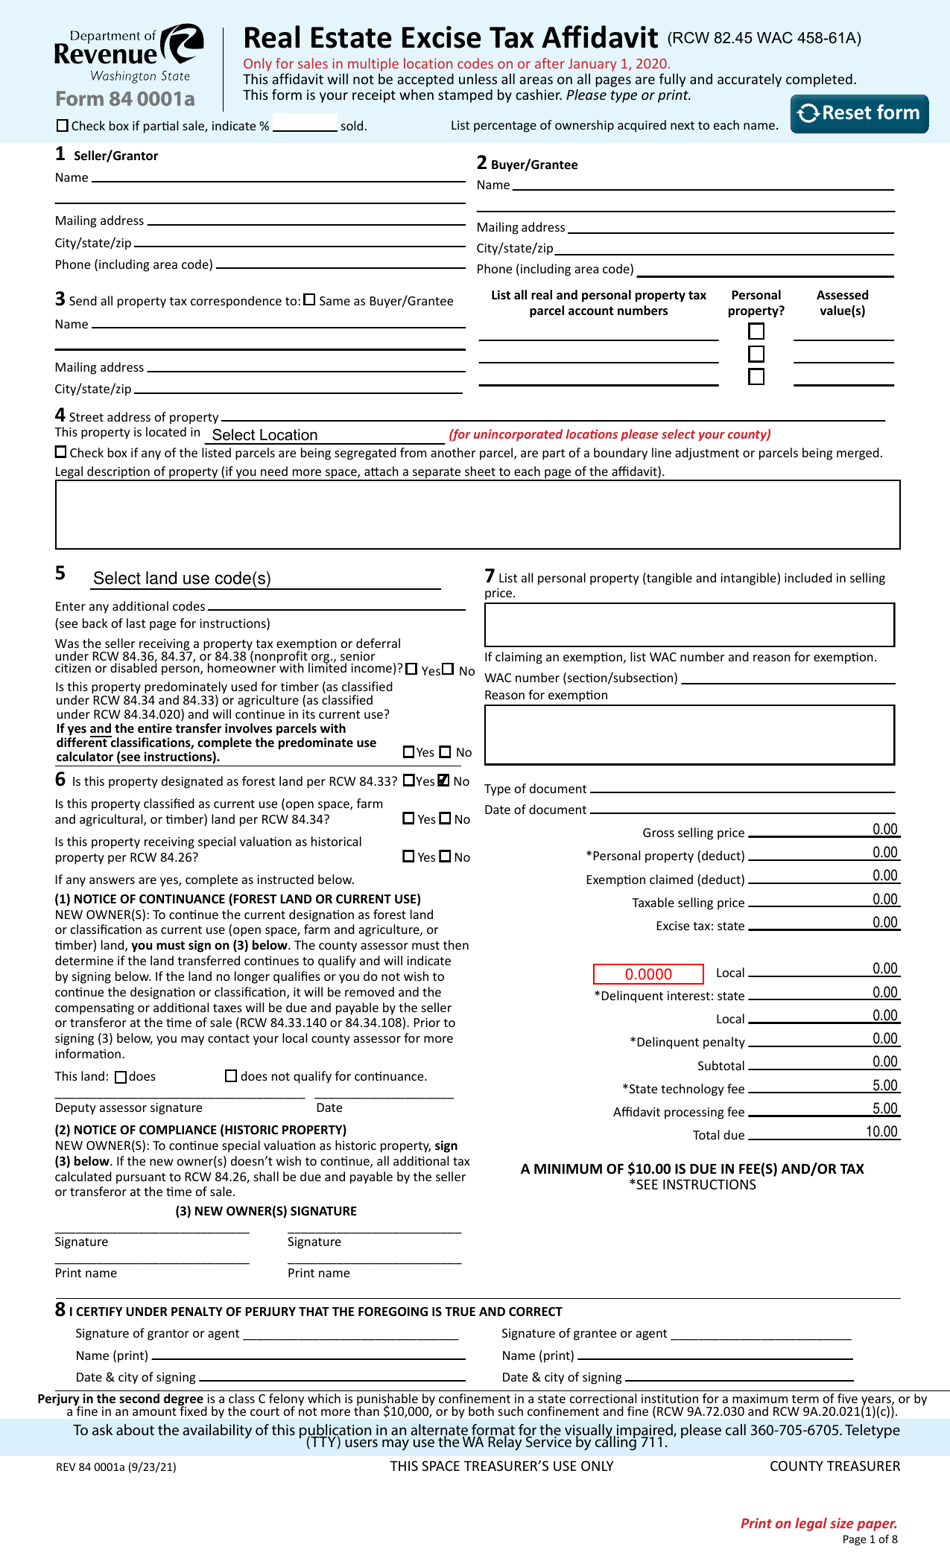 Form REV84 0001A Real Estate Excise Tax Affidavit - Multiple Locations - Washington, Page 1